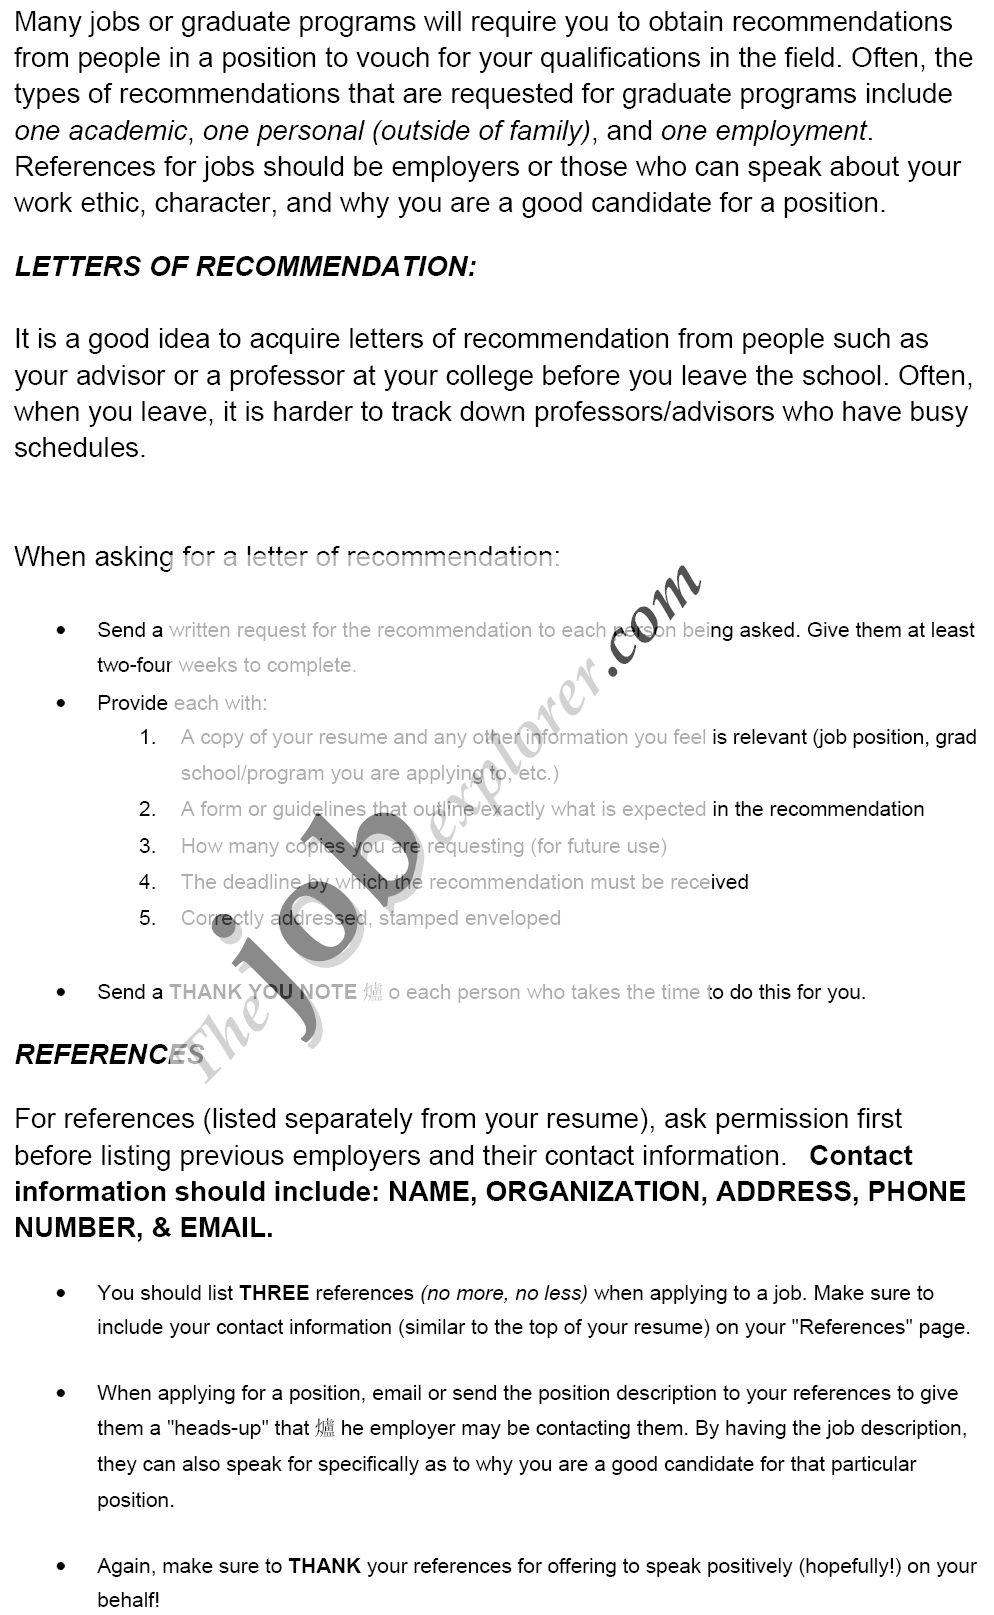 Sample Letter Of Recommendation For College Faculty Position from www.thejobexplorer.com